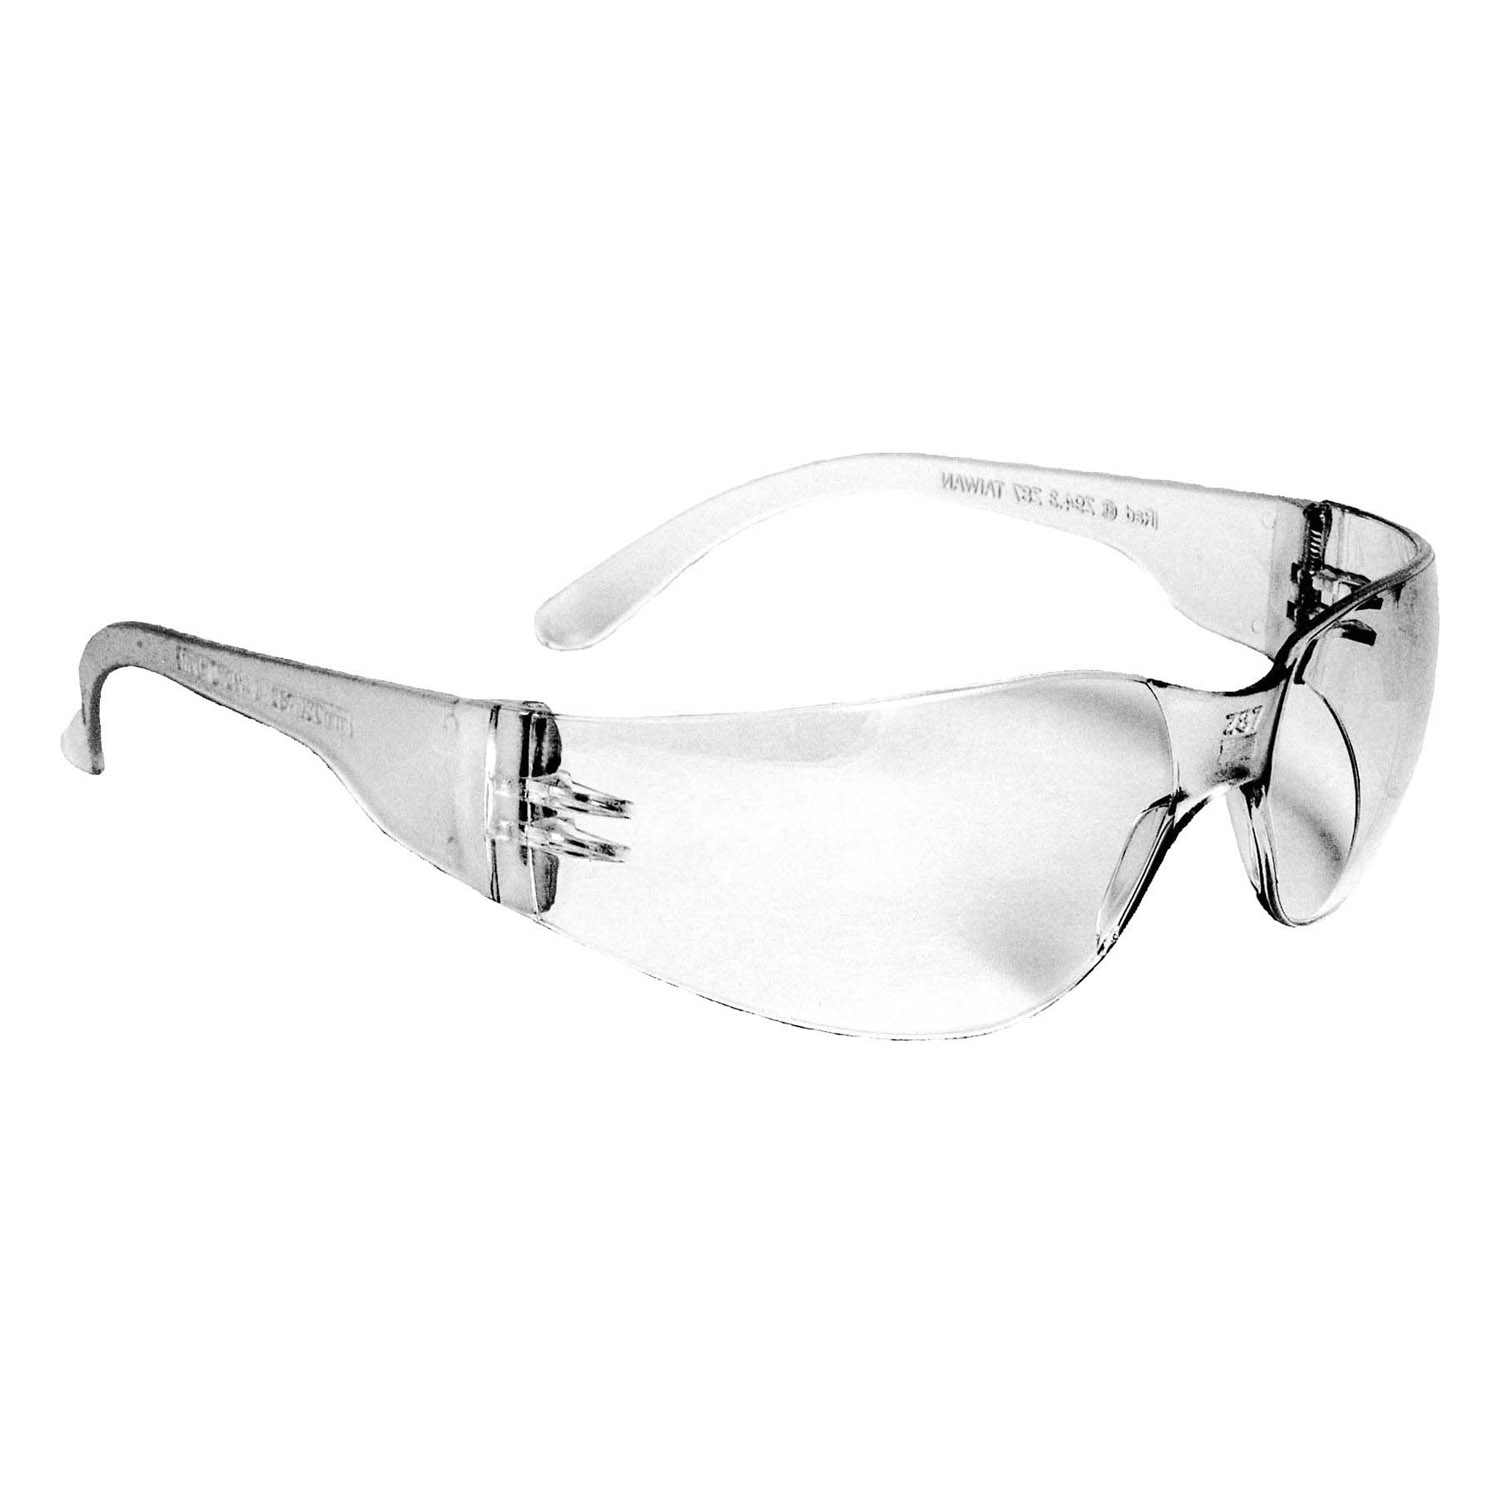 Mirage Safety Glasses-Clear Lens